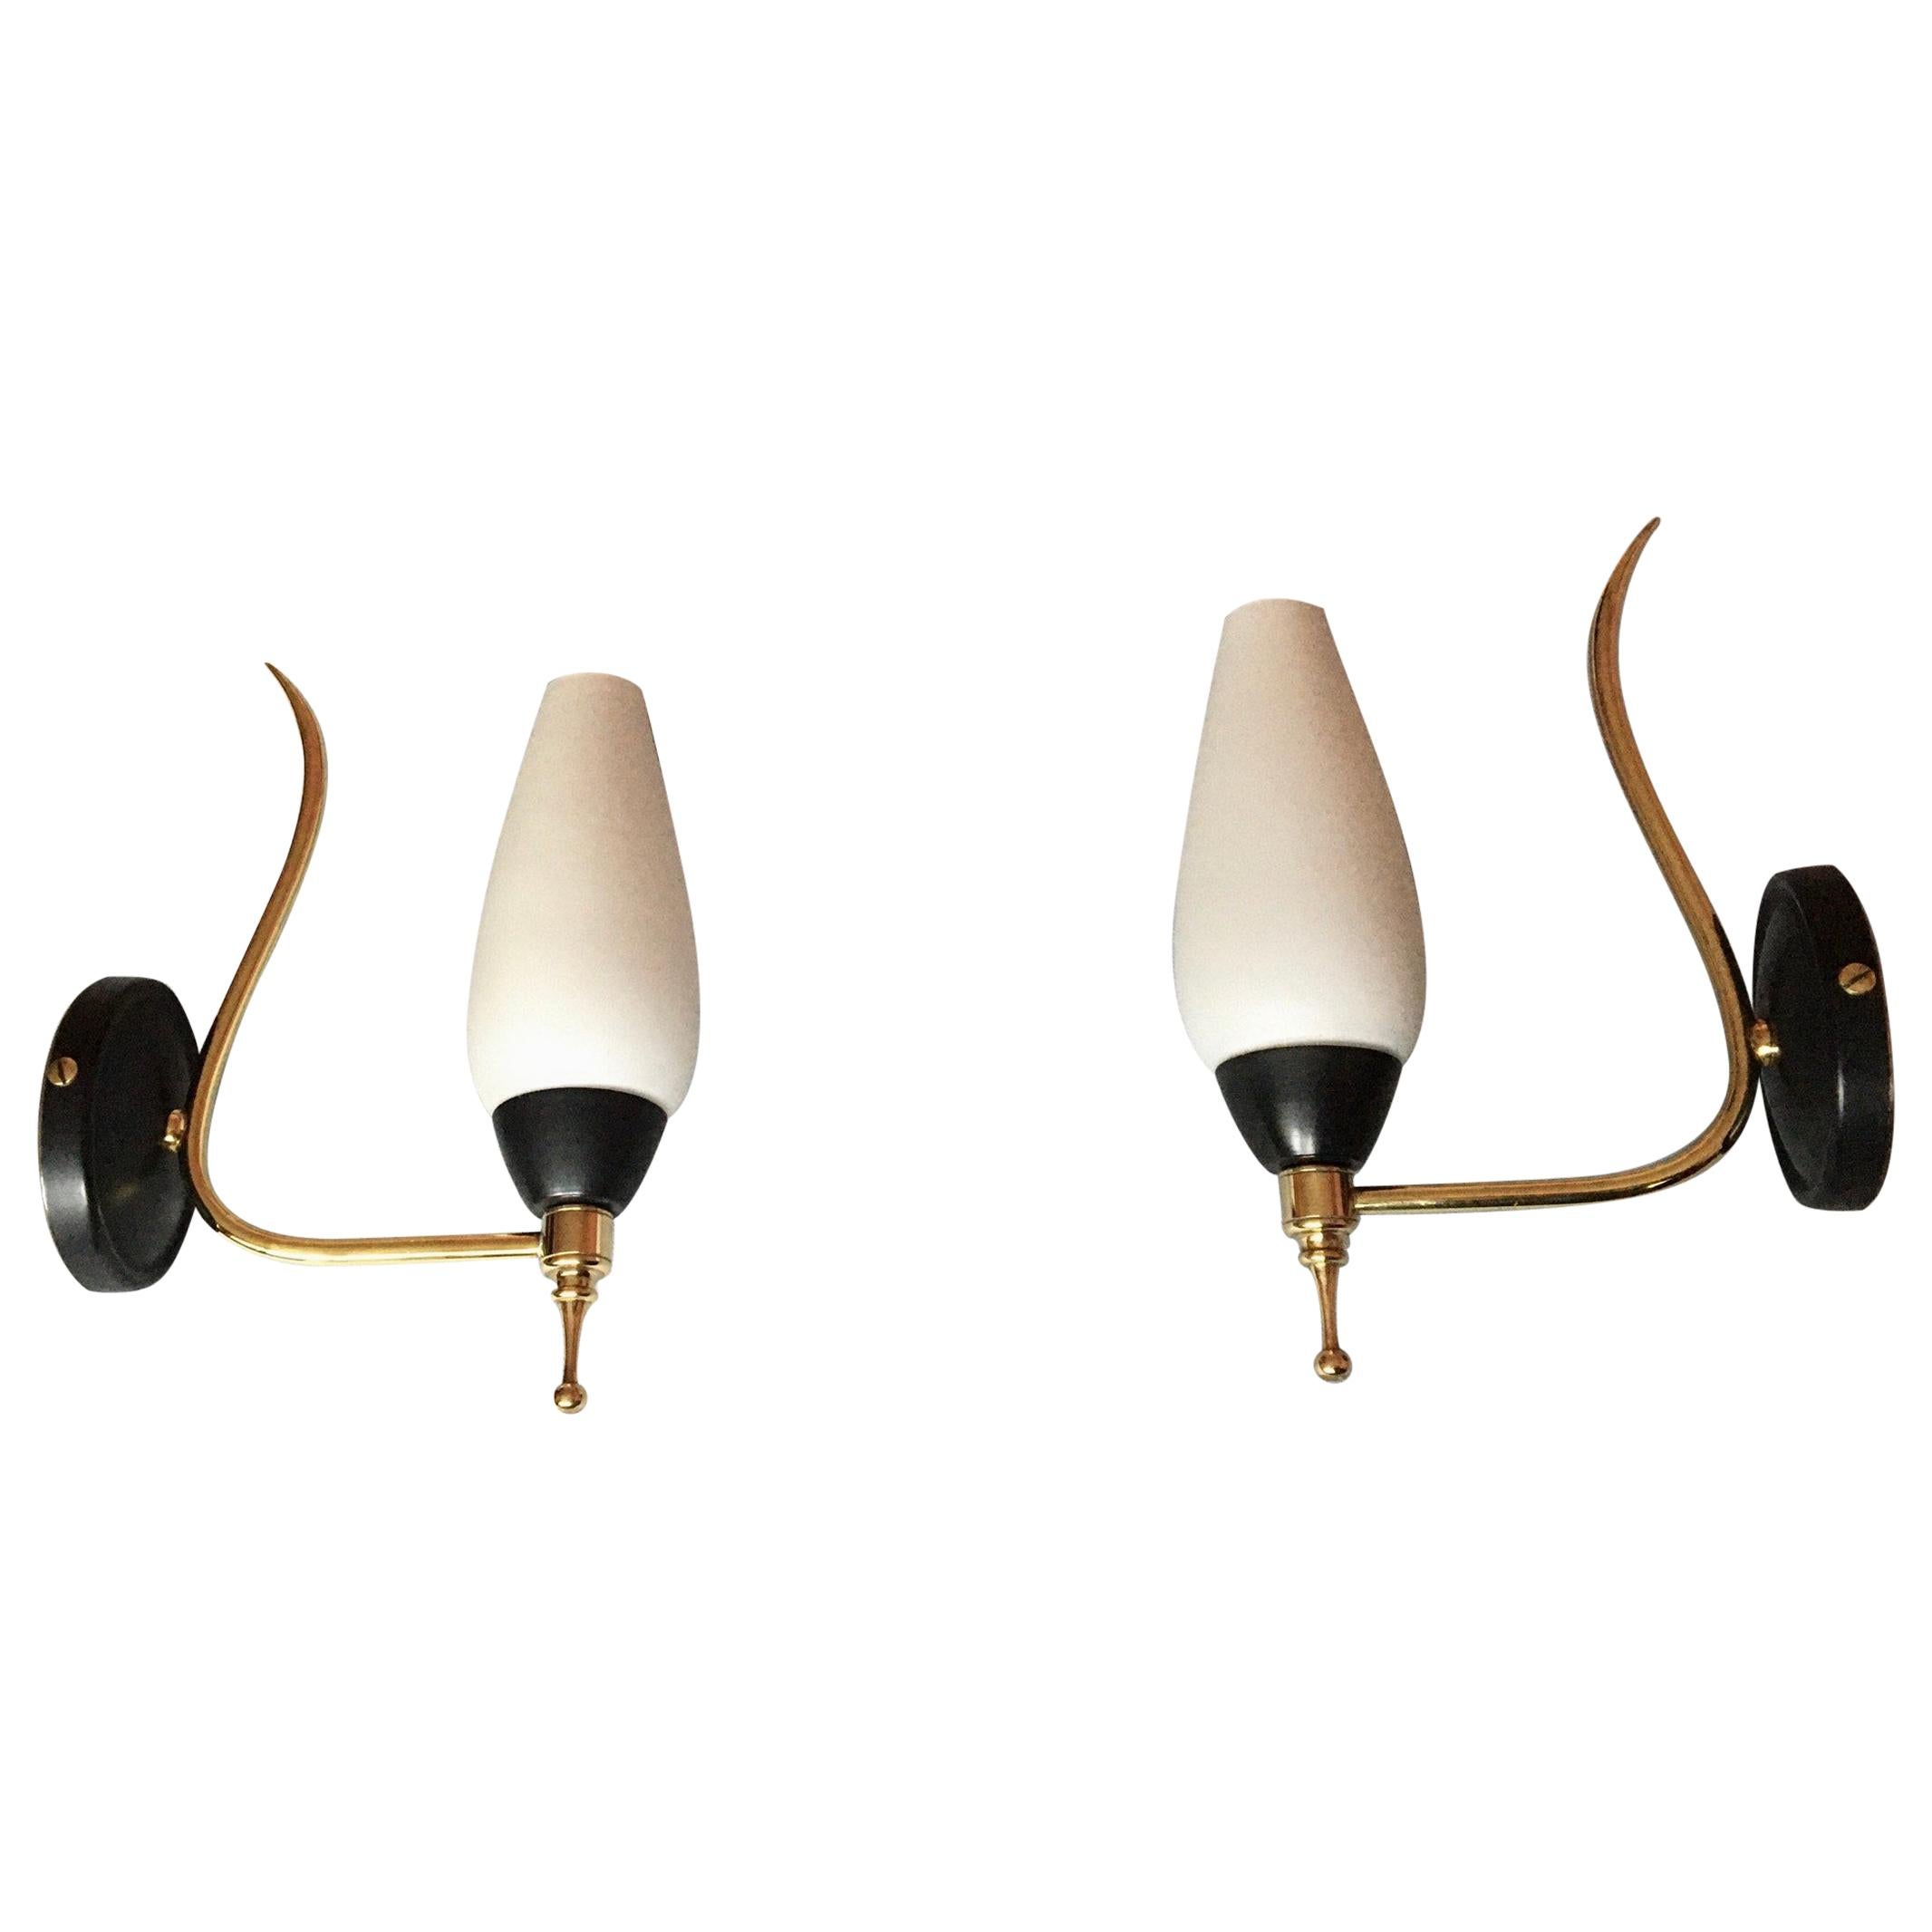 French Mid-Century Modern Style Black Gilt Brass Sconces, 1950 For Sale